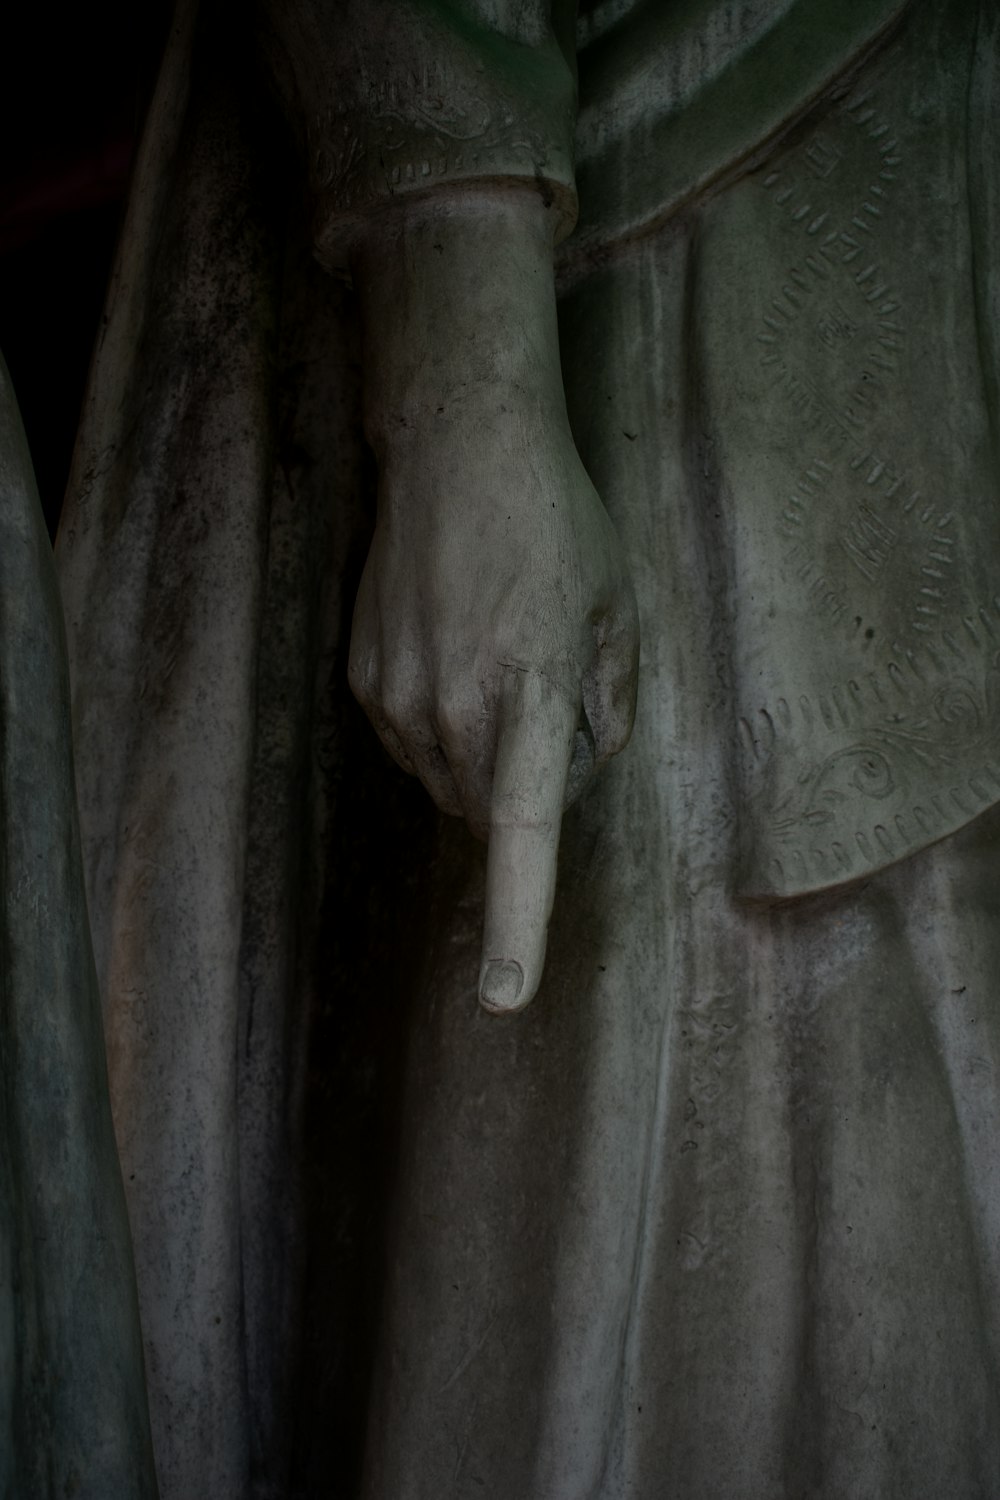 a close up of a statue of a person's hand